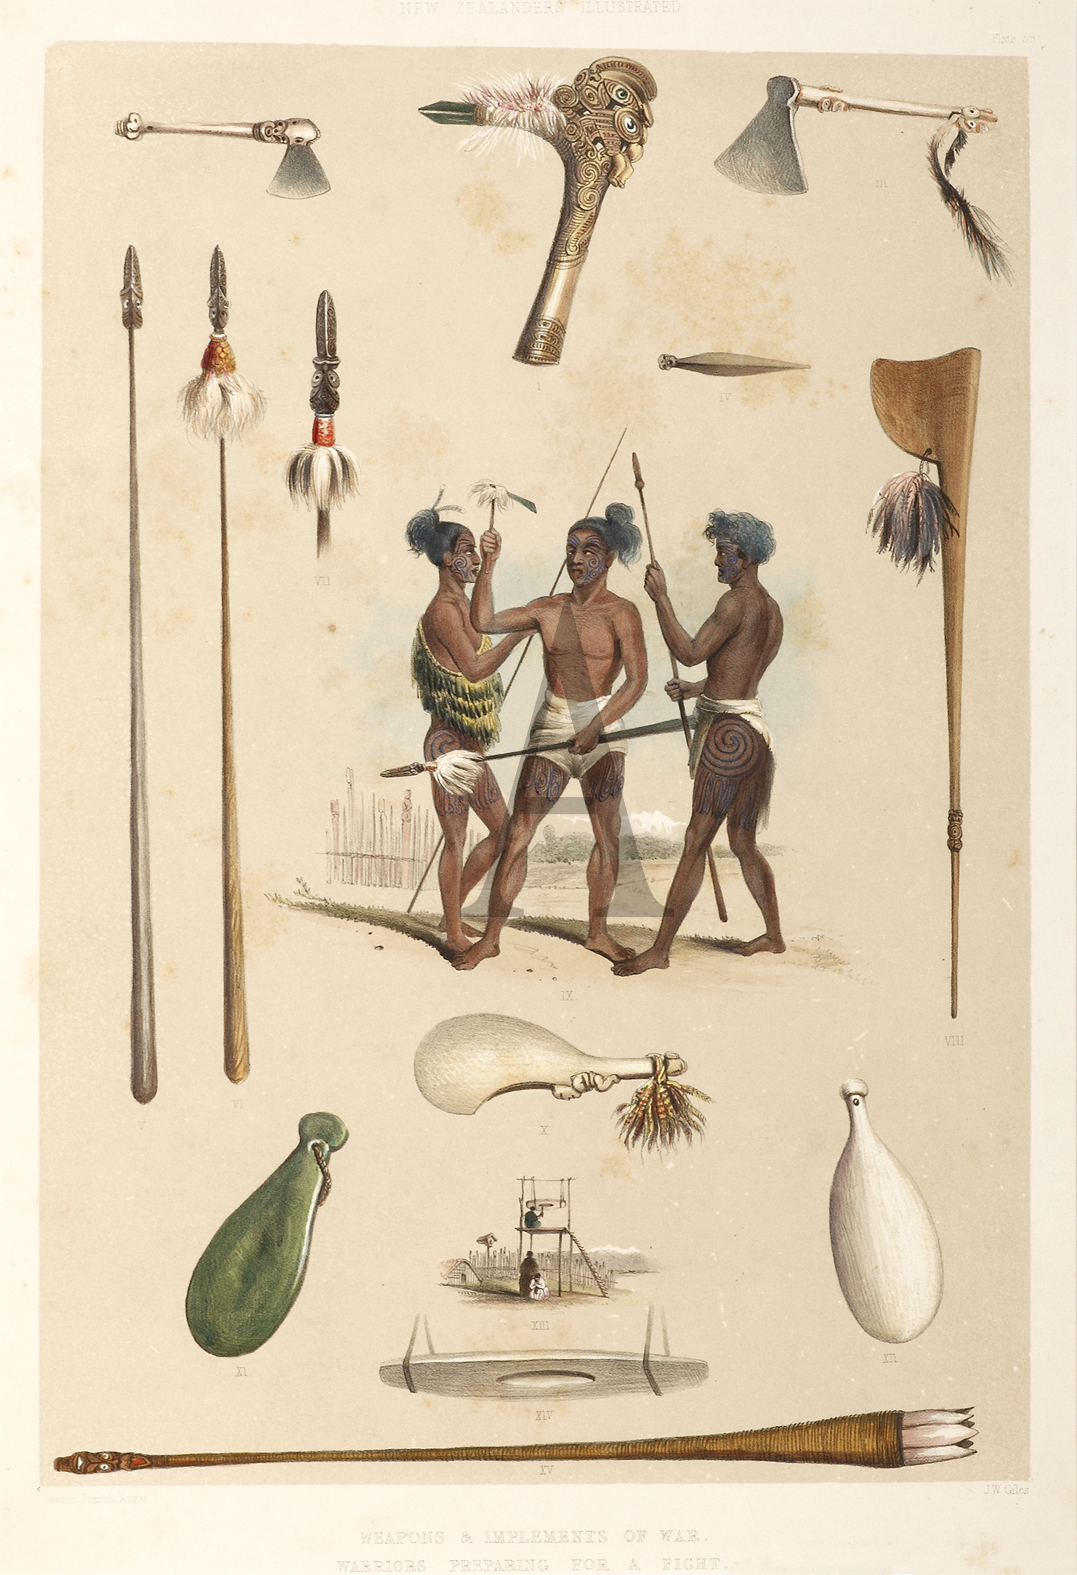 Weapons & Implements of War. Warriors Preparing for a Fight. - Antique Print from 1847